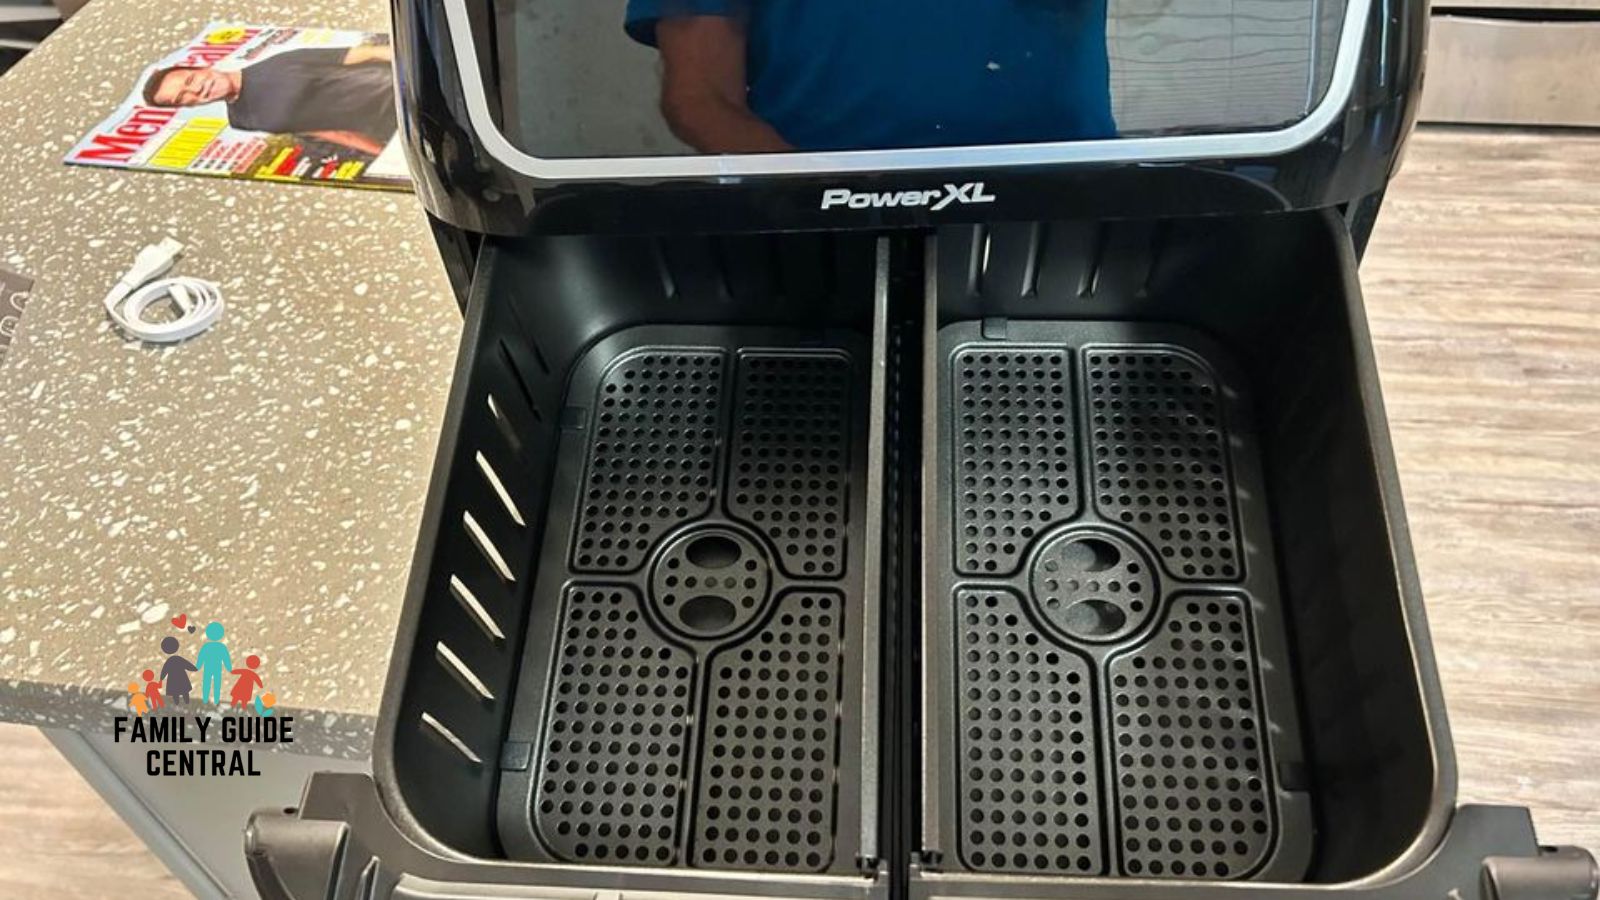 Air fryer with dual baskets - familyguidecentral.com